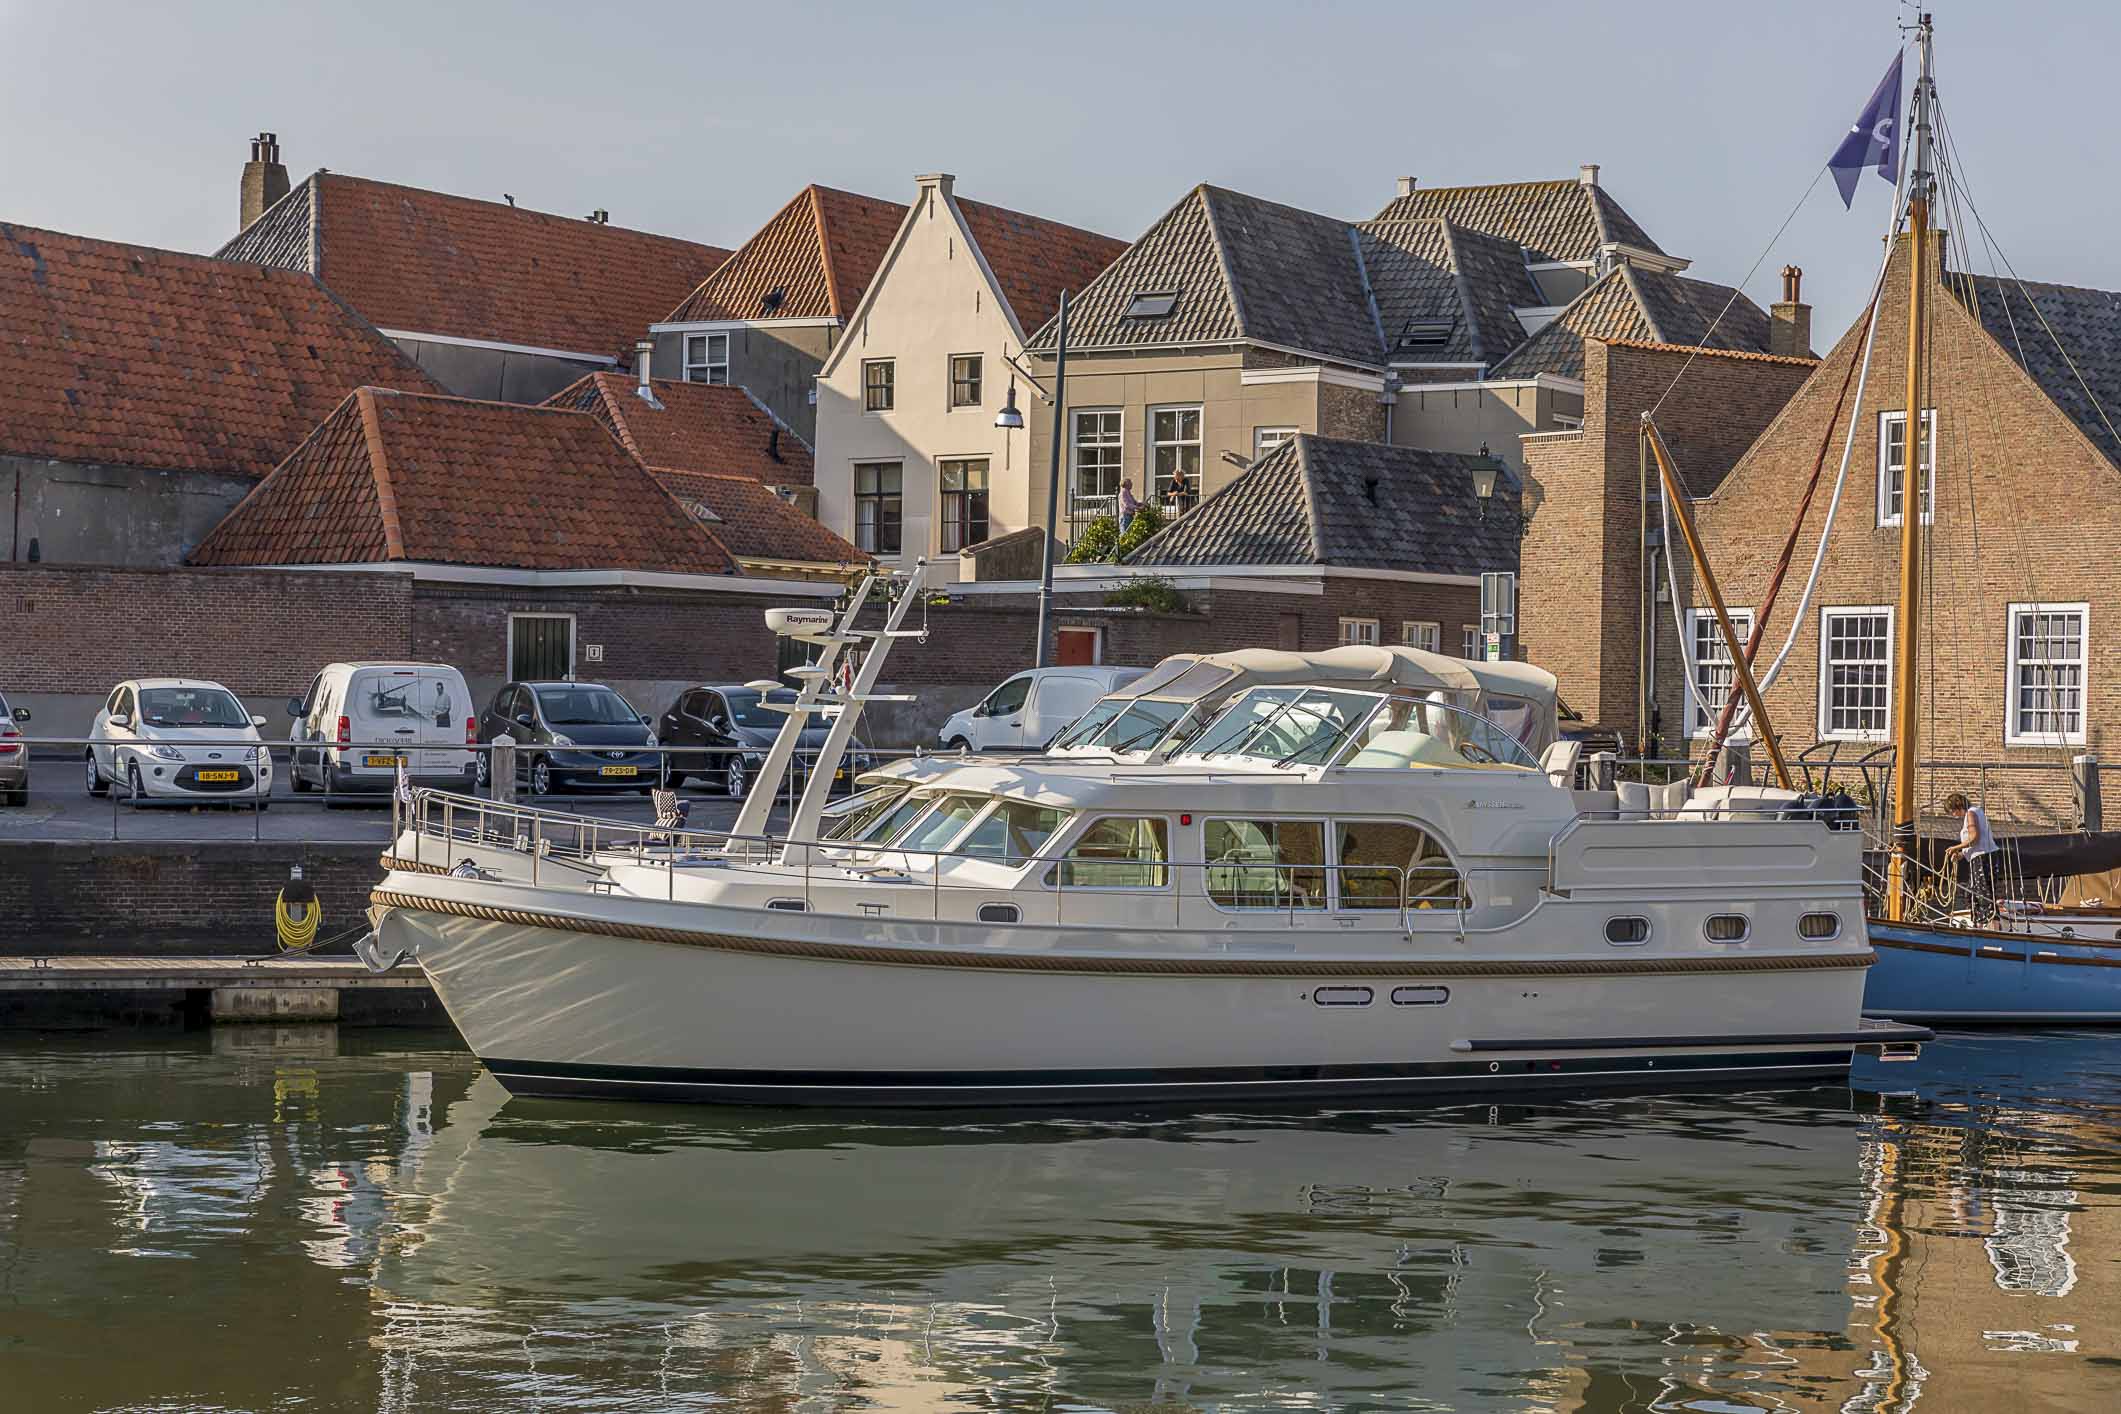 Things to consider when choosing a self-drive boat